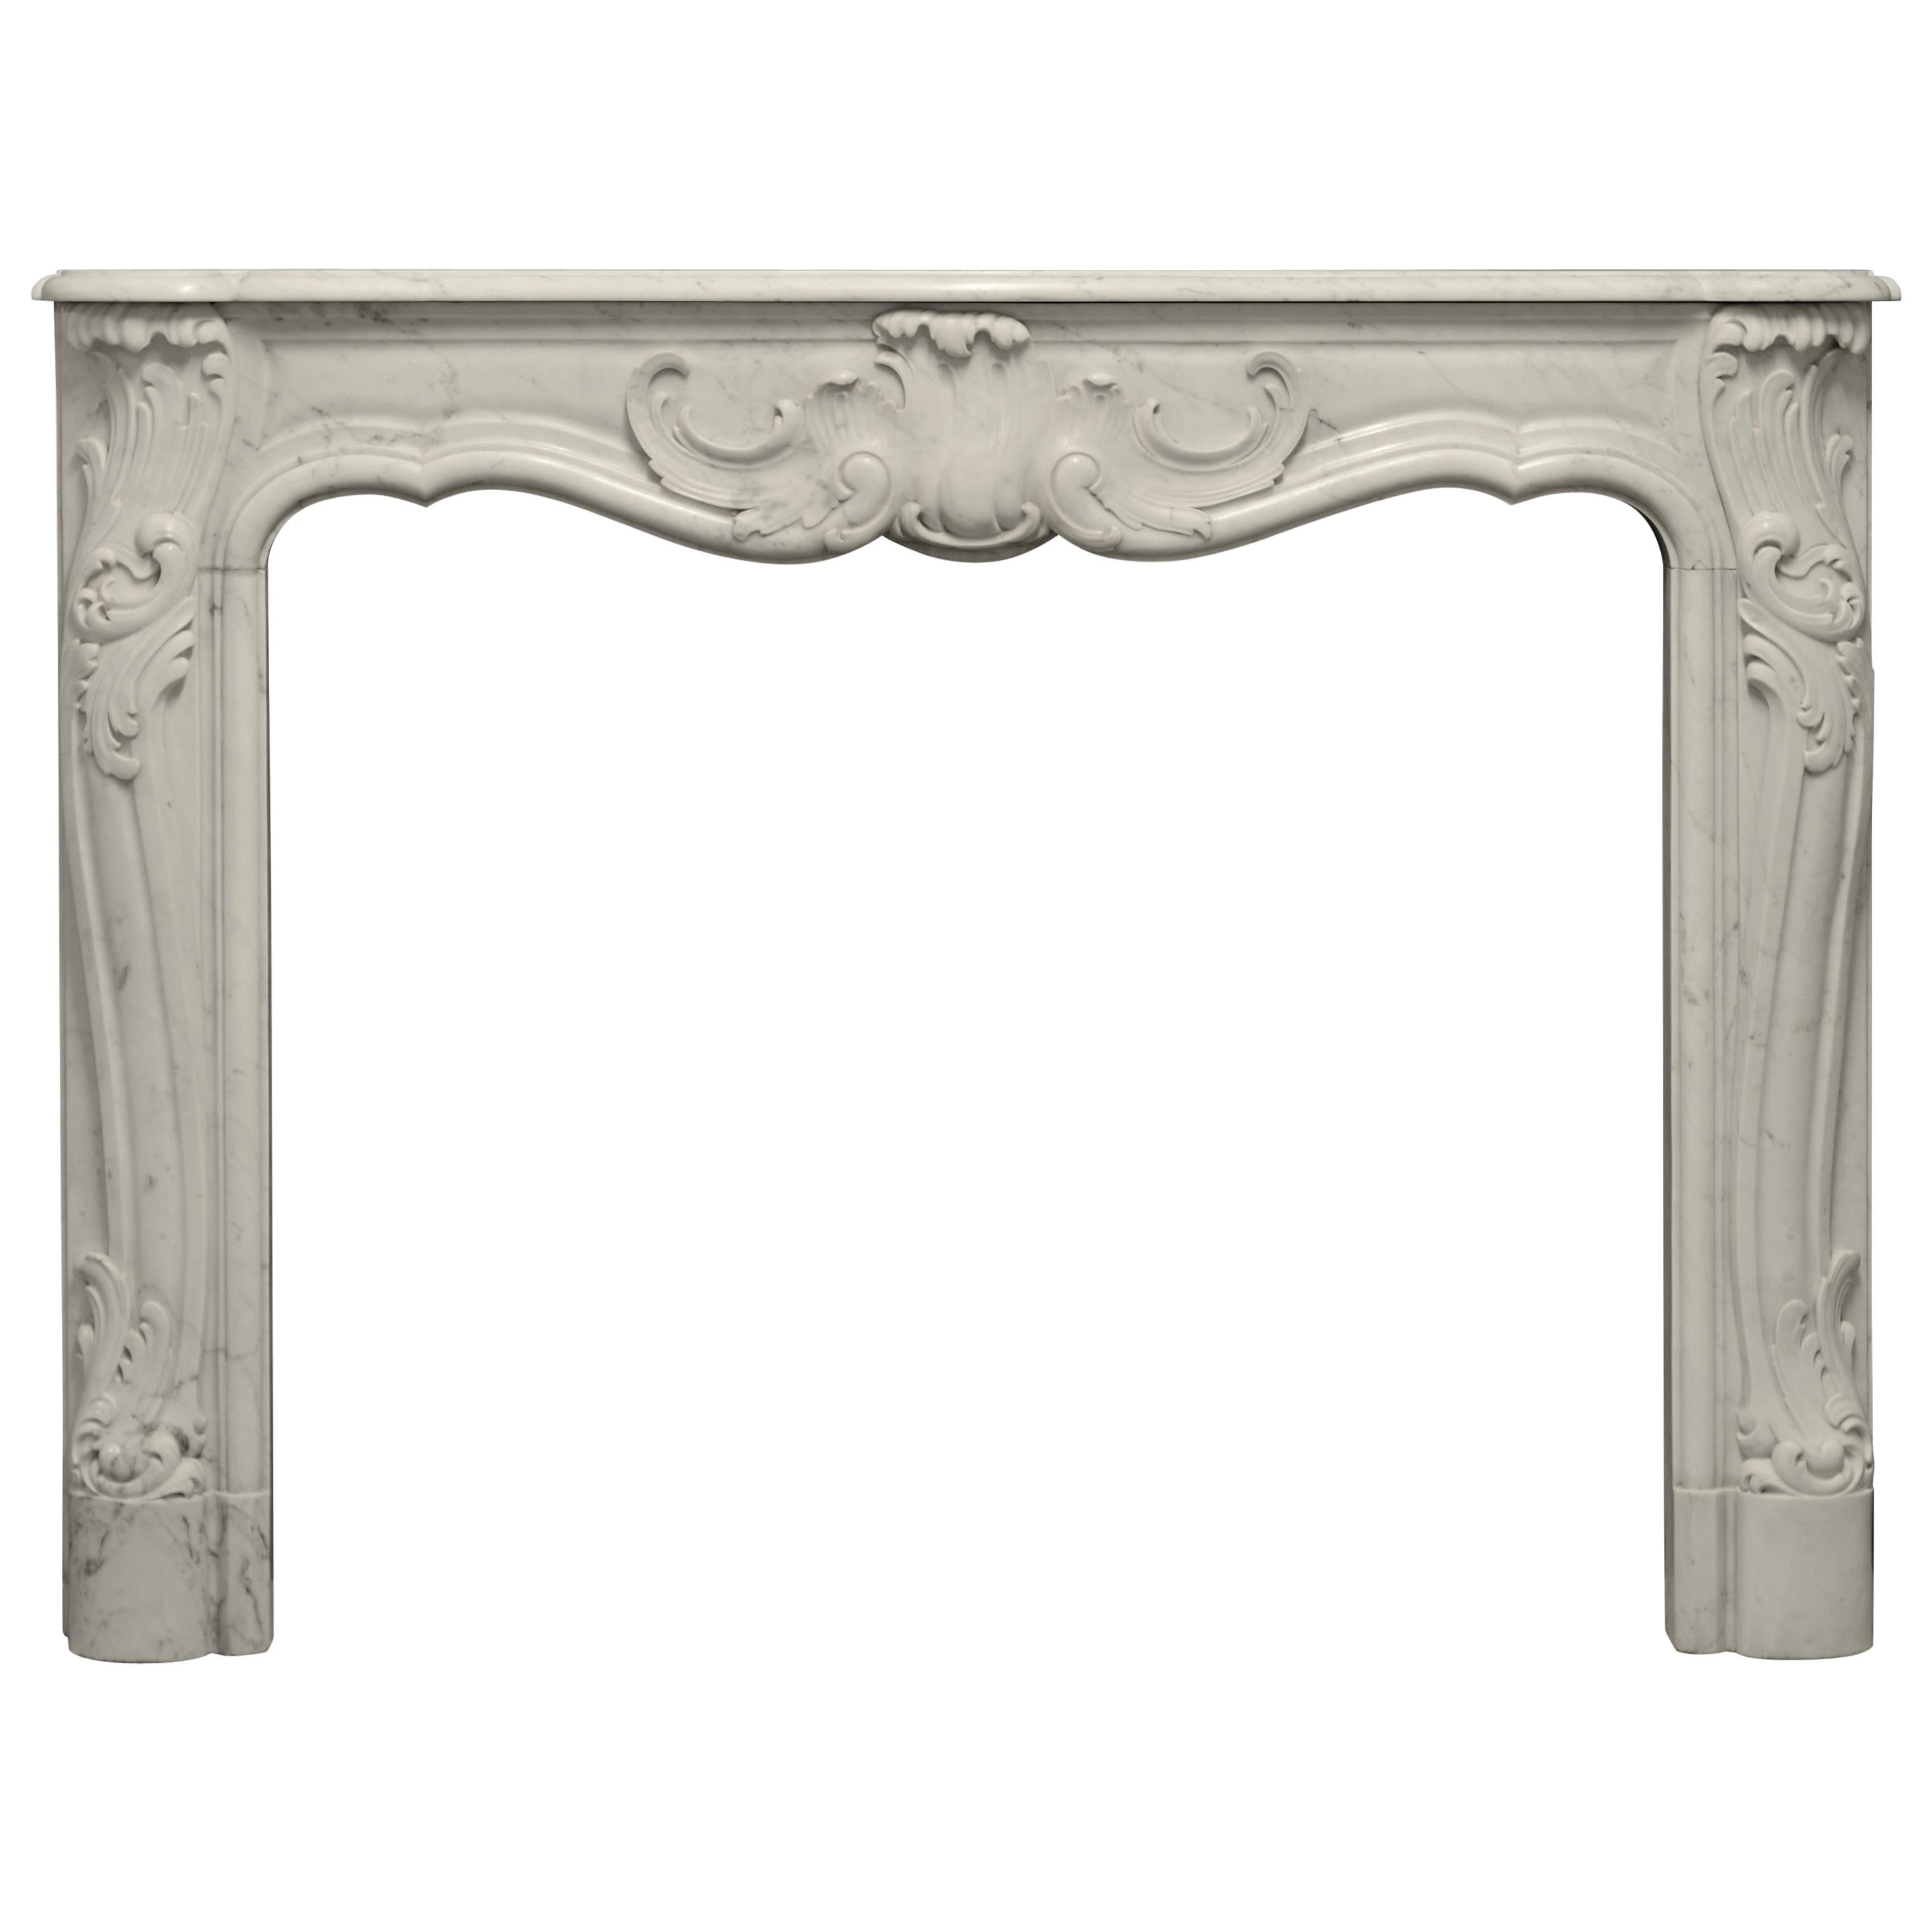 Rococo Style Fireplace Mantel in White Marble